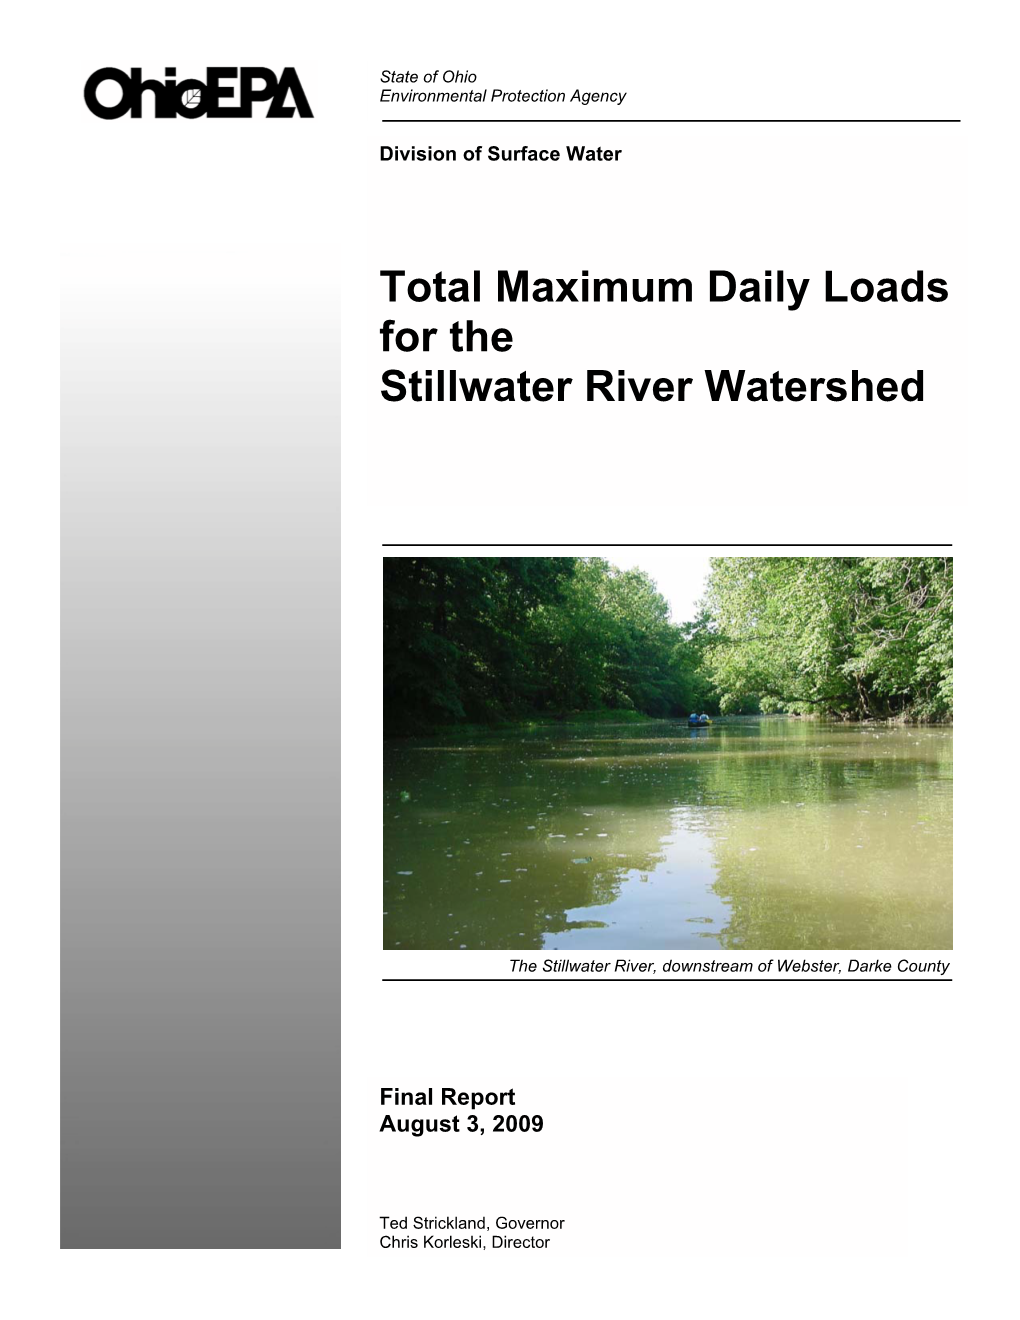 Total Maximum Daily Loads for the Stillwater River Watershed